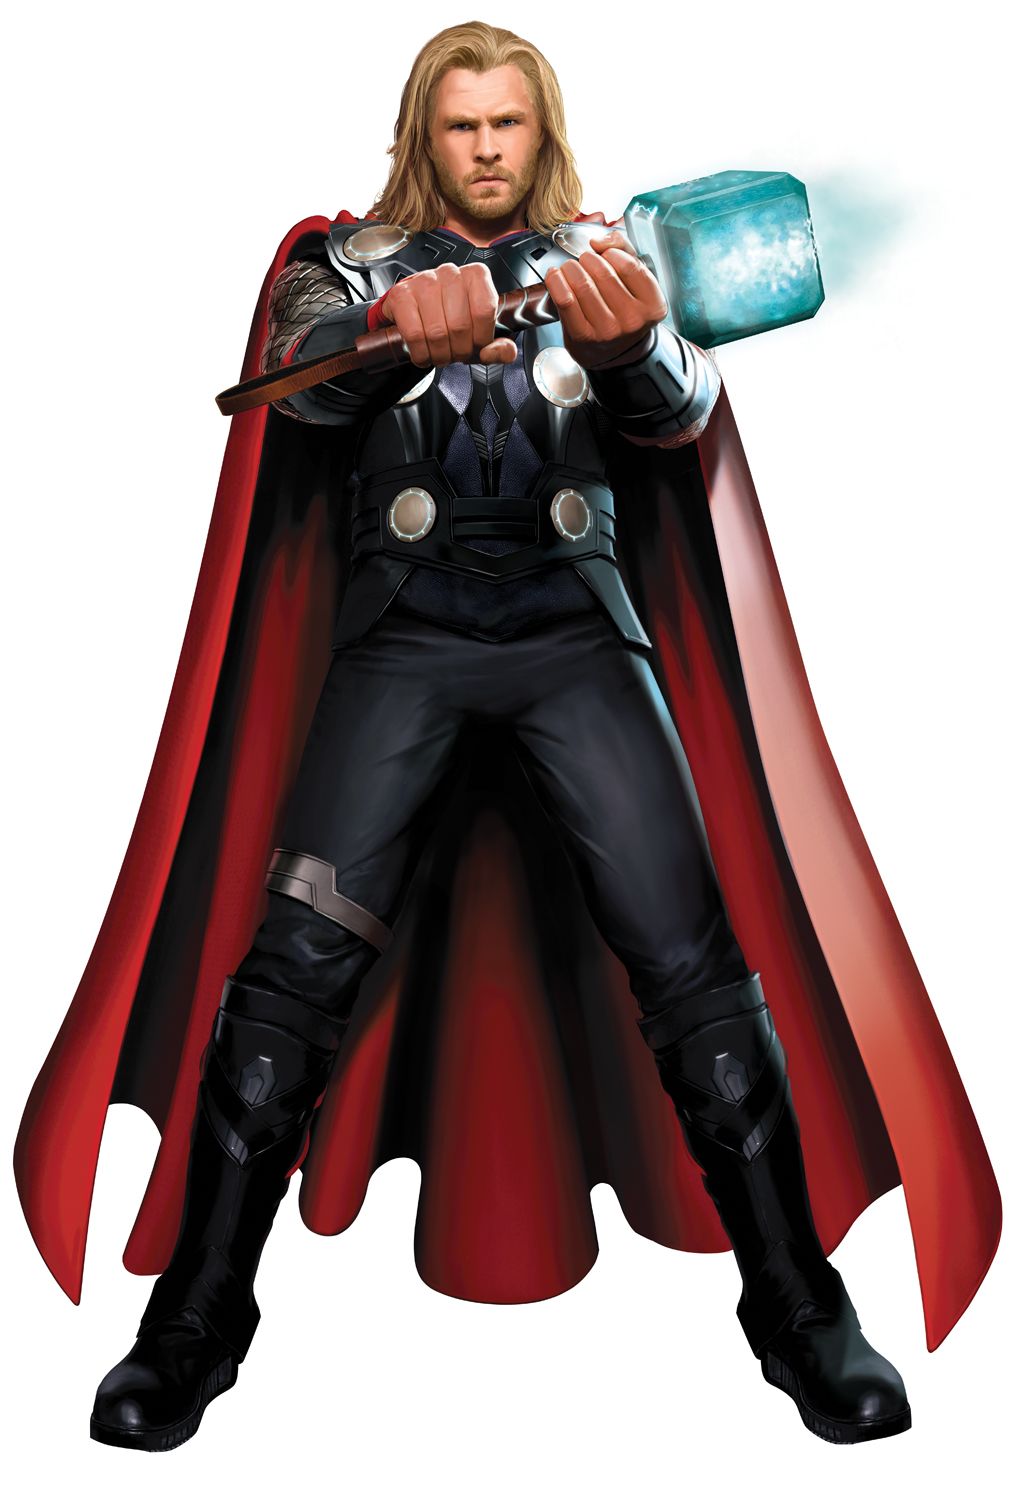 Thor Concept Image #1